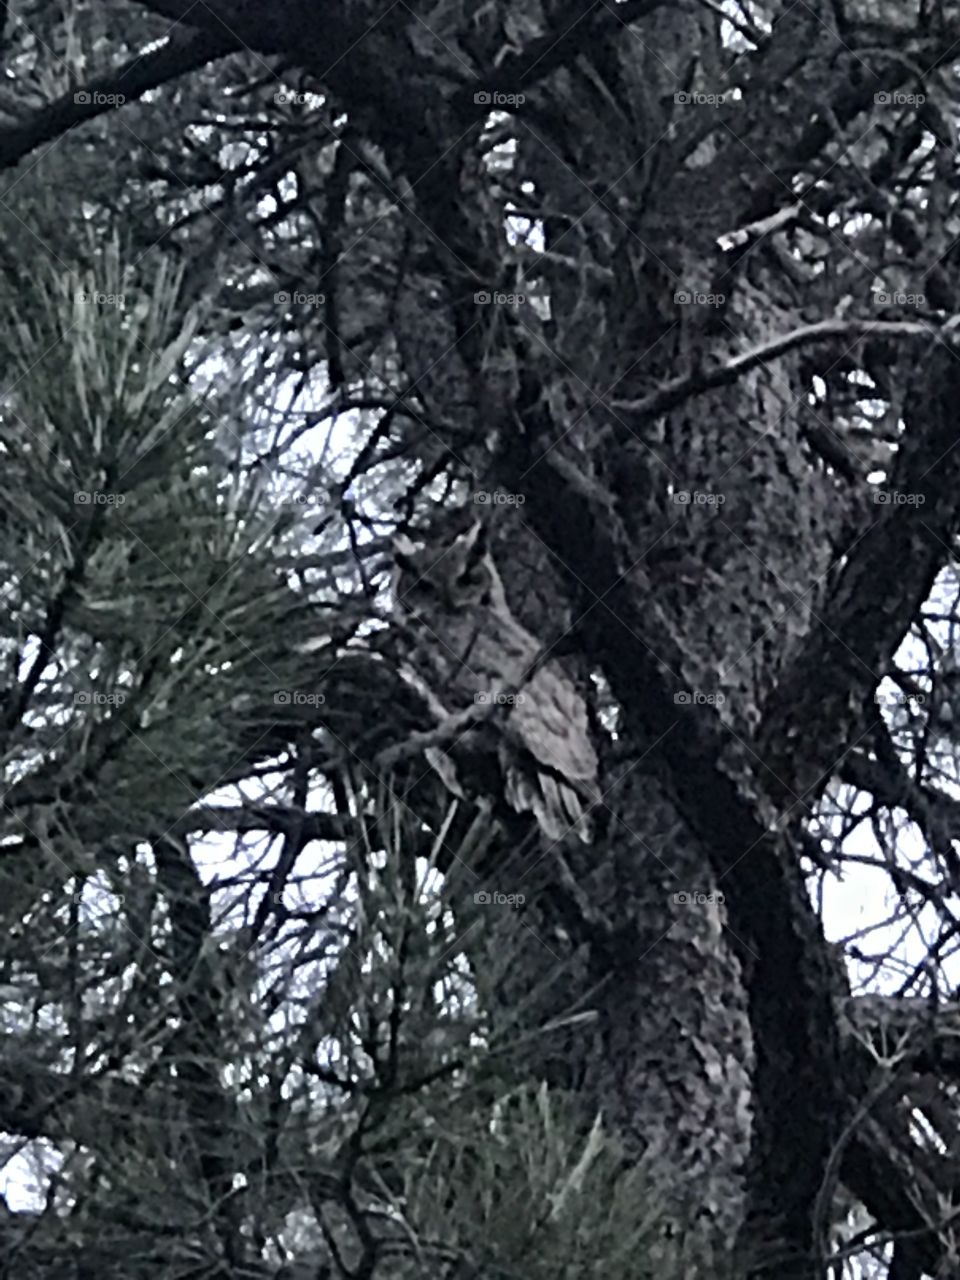 Occasionally if you look up when an owl is hooting you will see one.